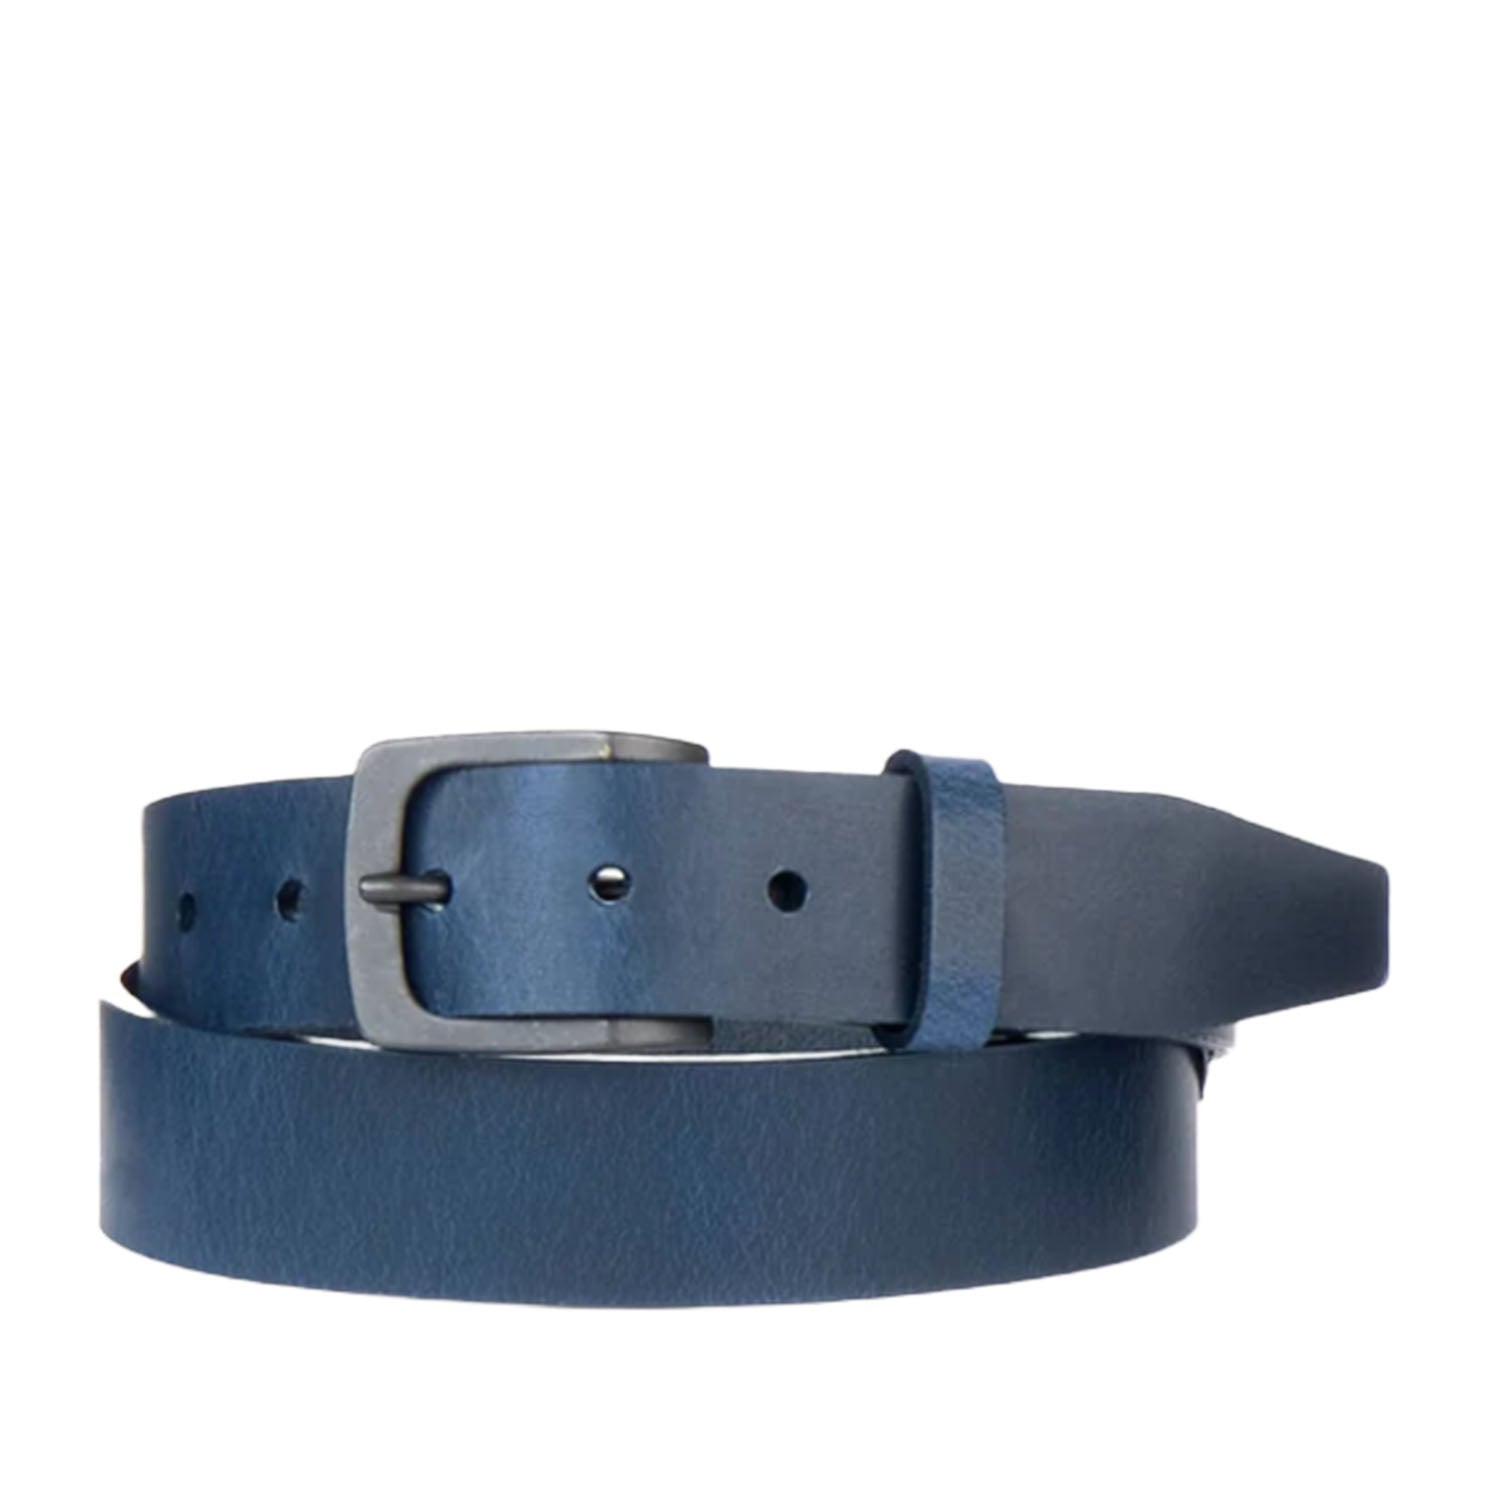 Brave Leather Men's Kwant in Navy Bridle